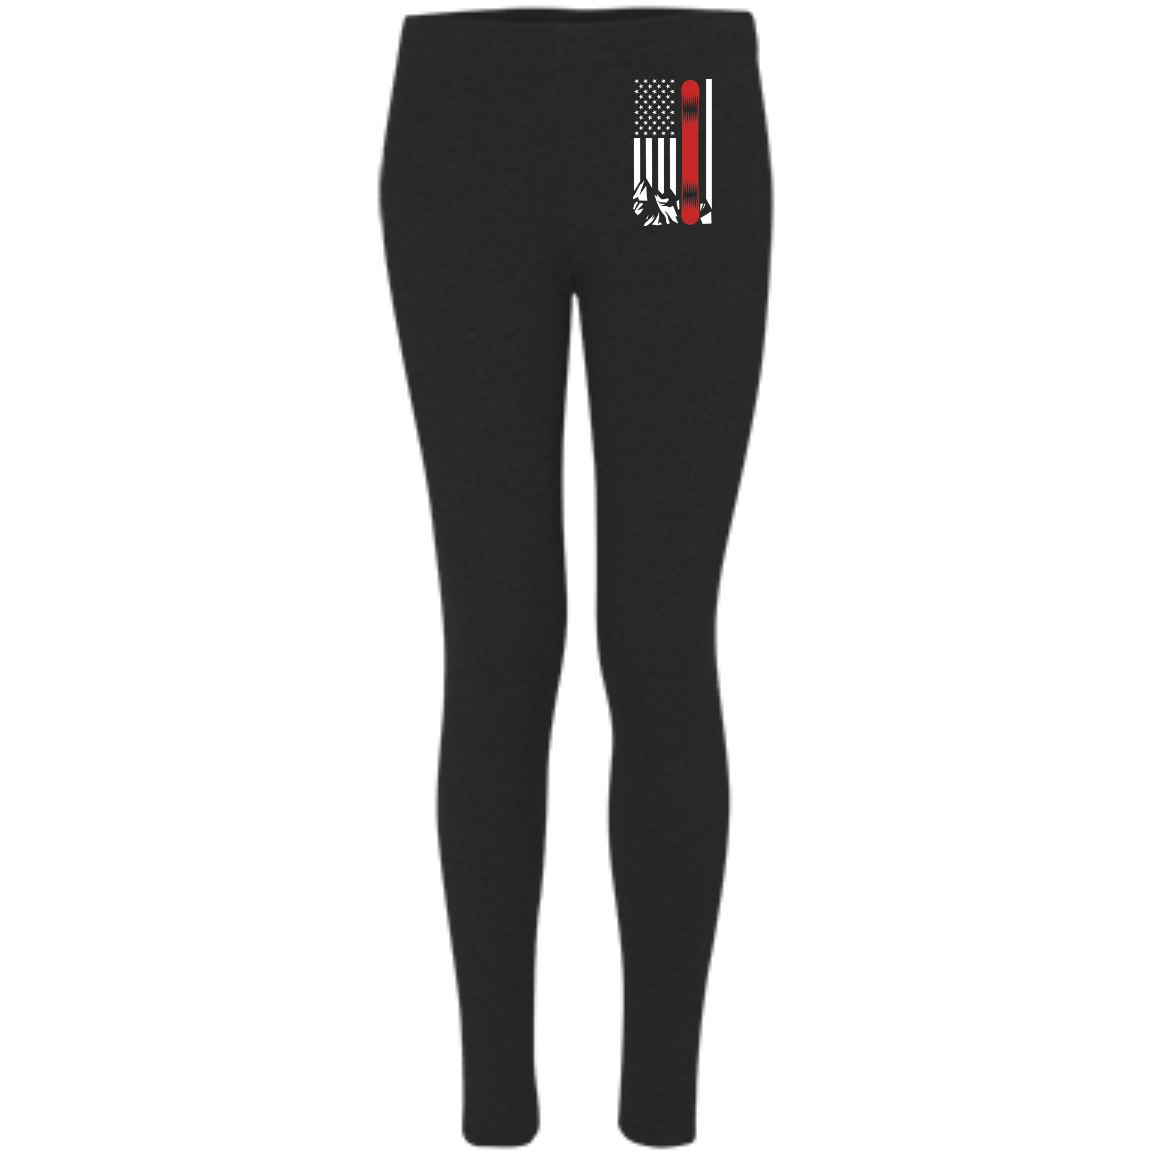 USA Snowboard Flag Thin Red Line Women's Embroidered Leggings - Powderaddicts